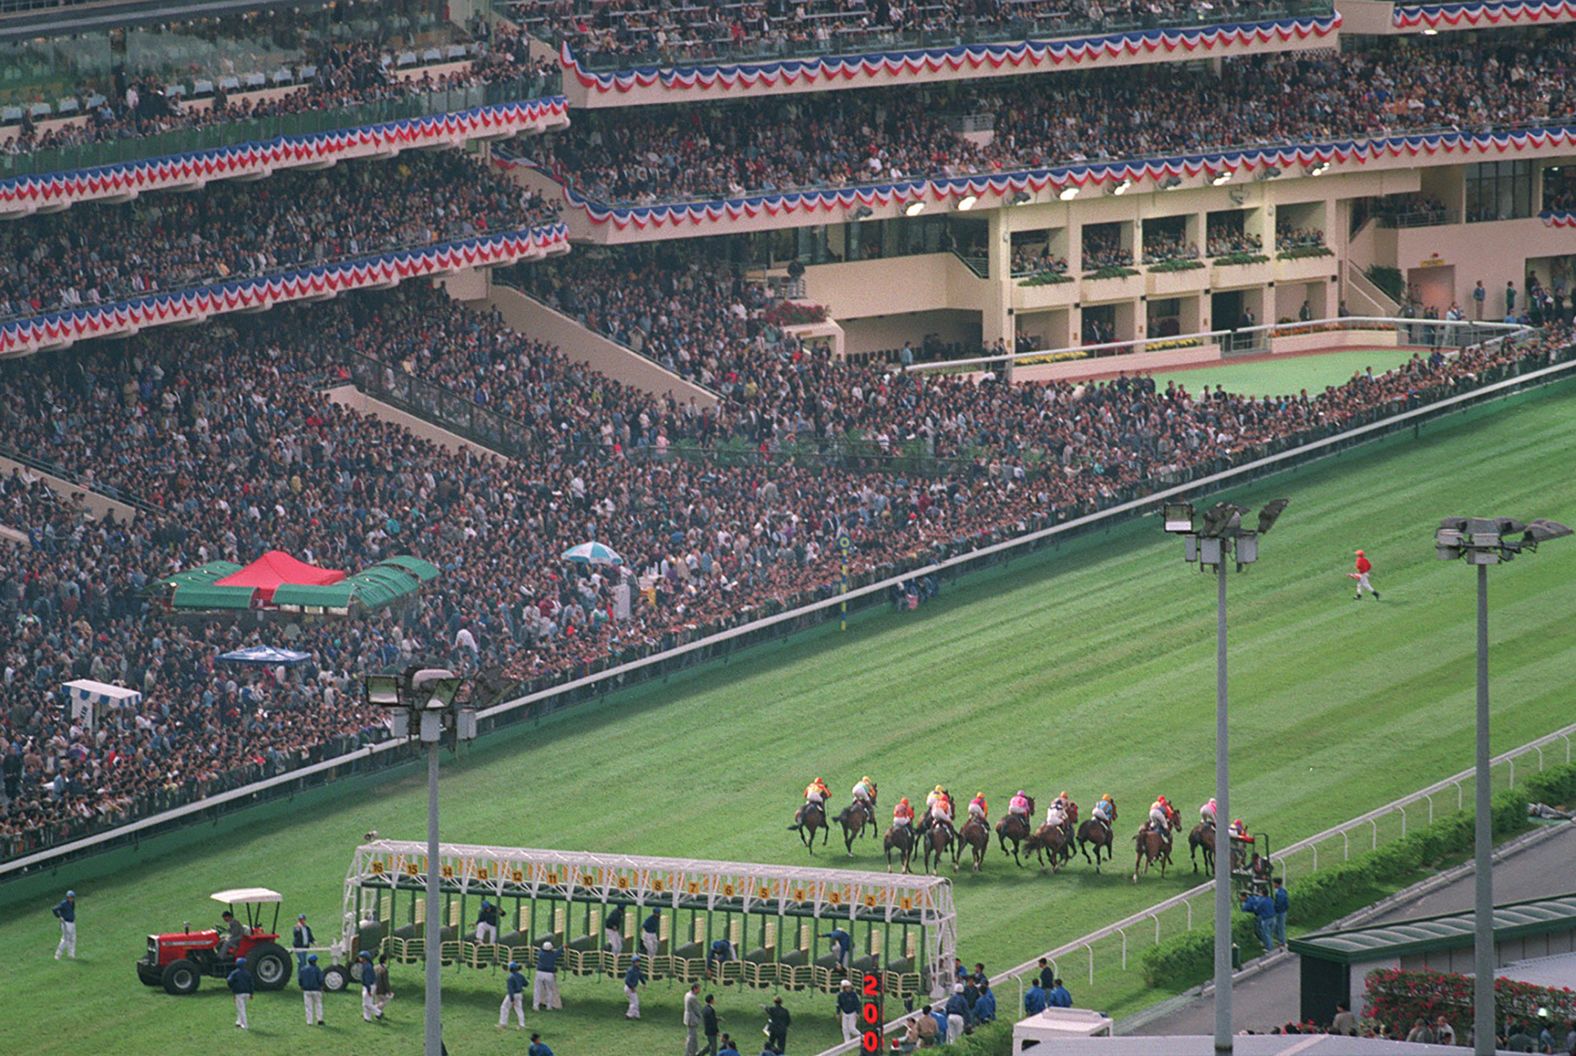 After being closed for renovations, the Happy Valley Racecourse reopened with a race in front of a packed stand on November 25, 1995. Patten was among the 45,815 fans whose wagers made up a total of $1.1 billion on the twilight meeting.